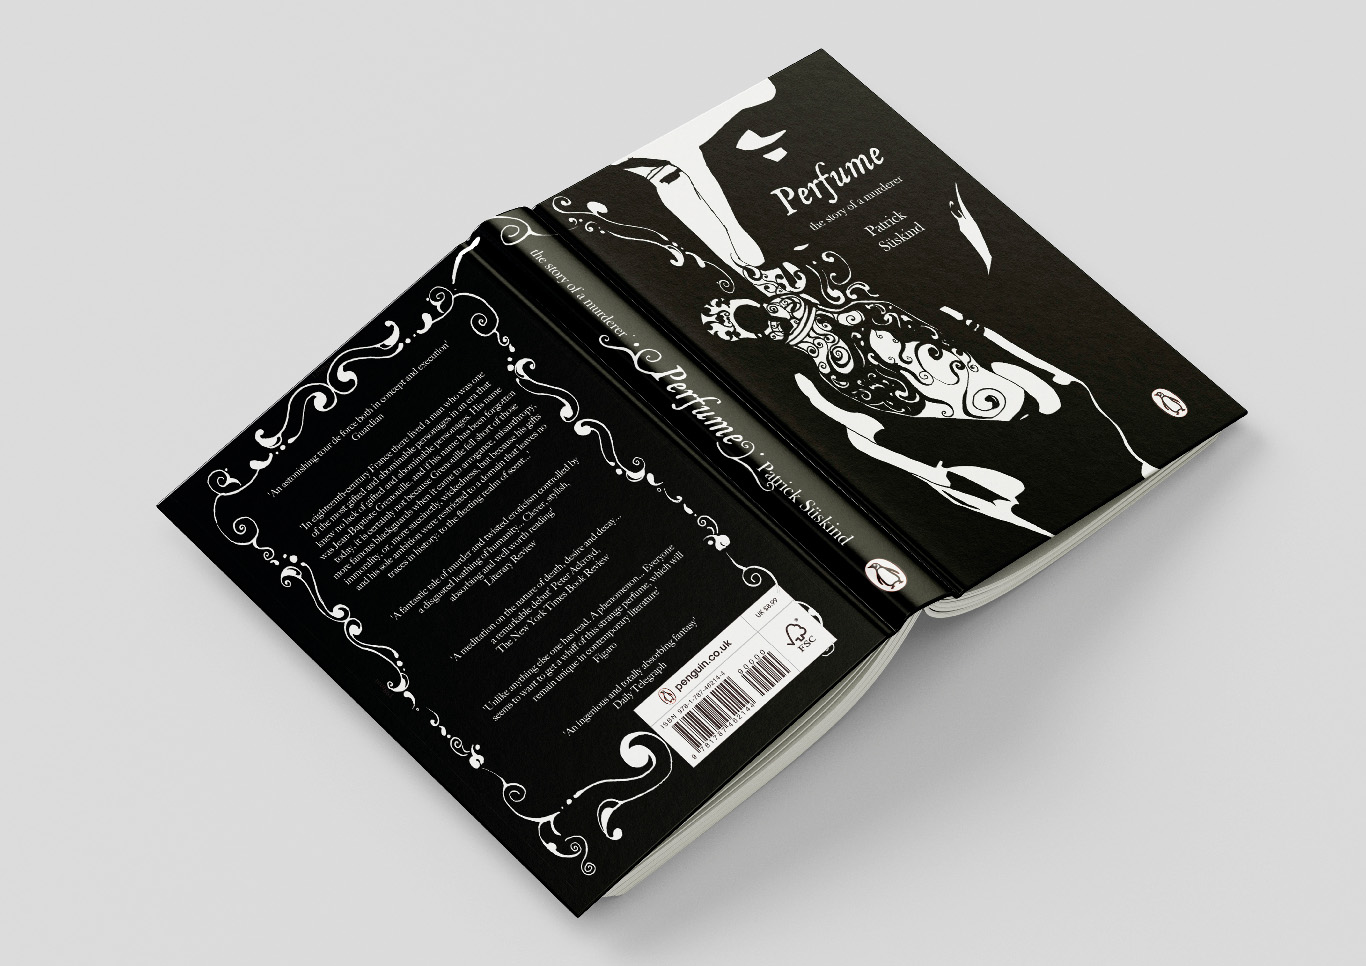 Black book cover with illustration of person sniffing ornate perfume bottle